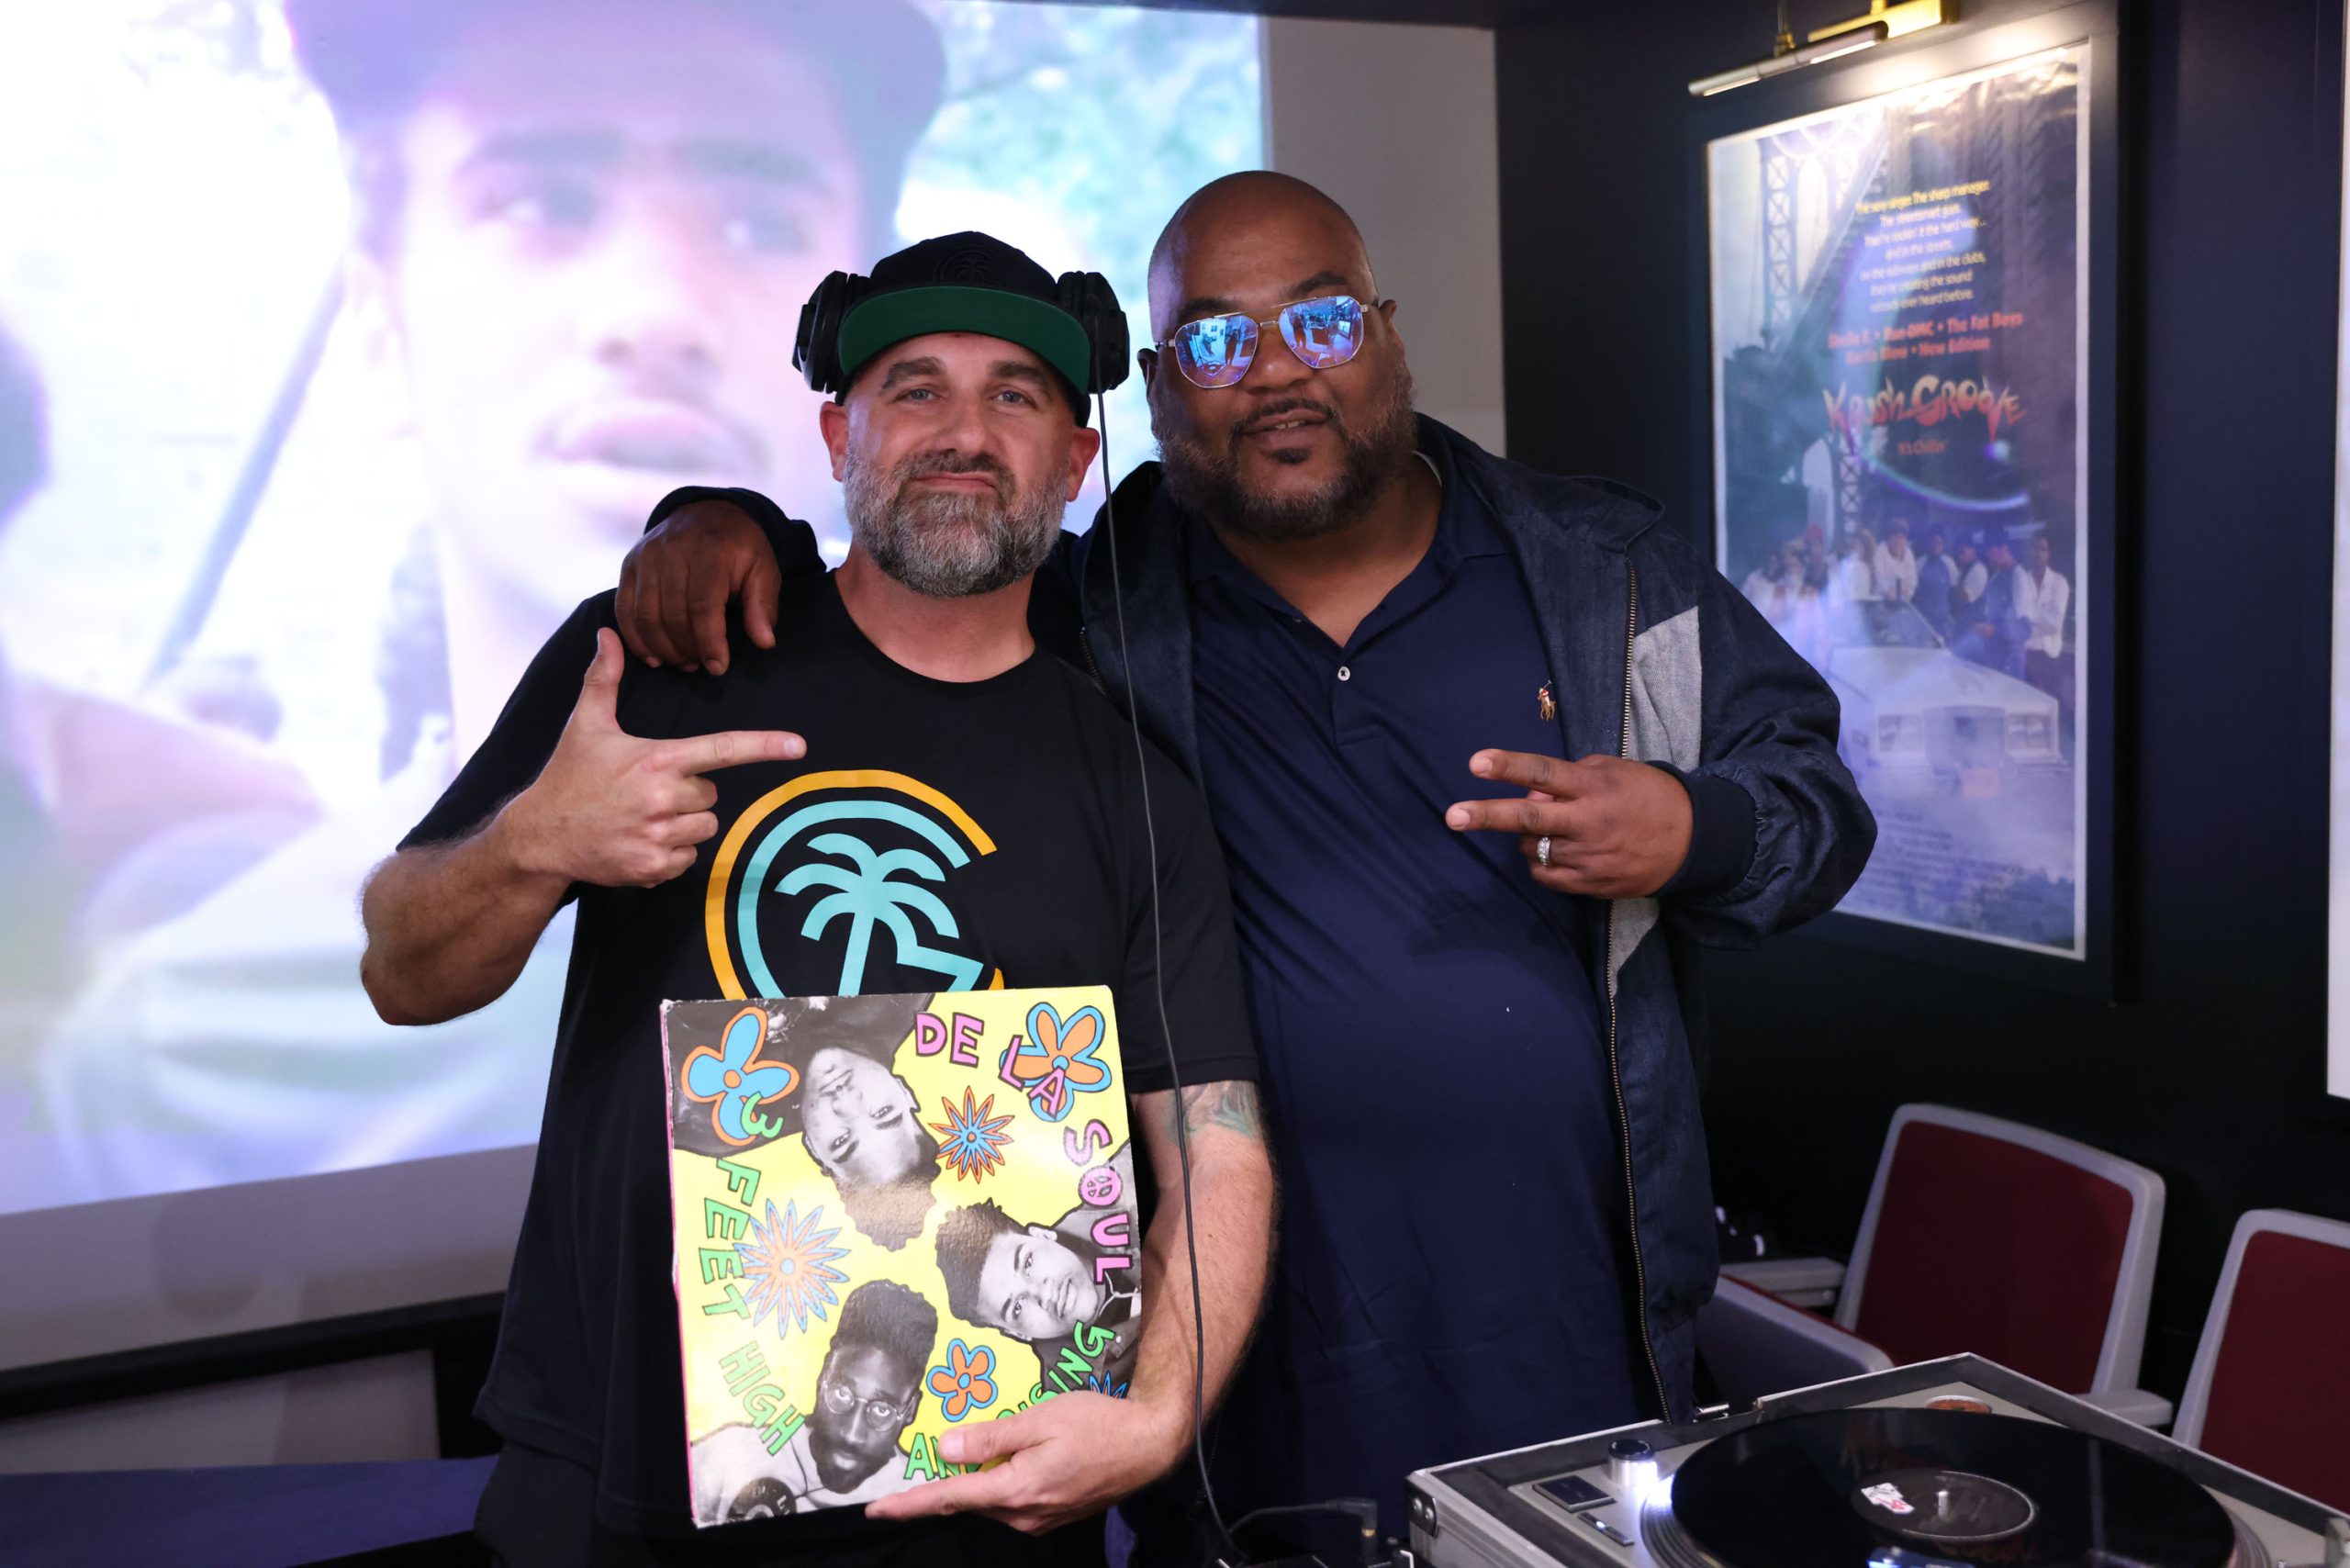 Celebrating 35 Years of De La Soul's 3 Feet High and Rising